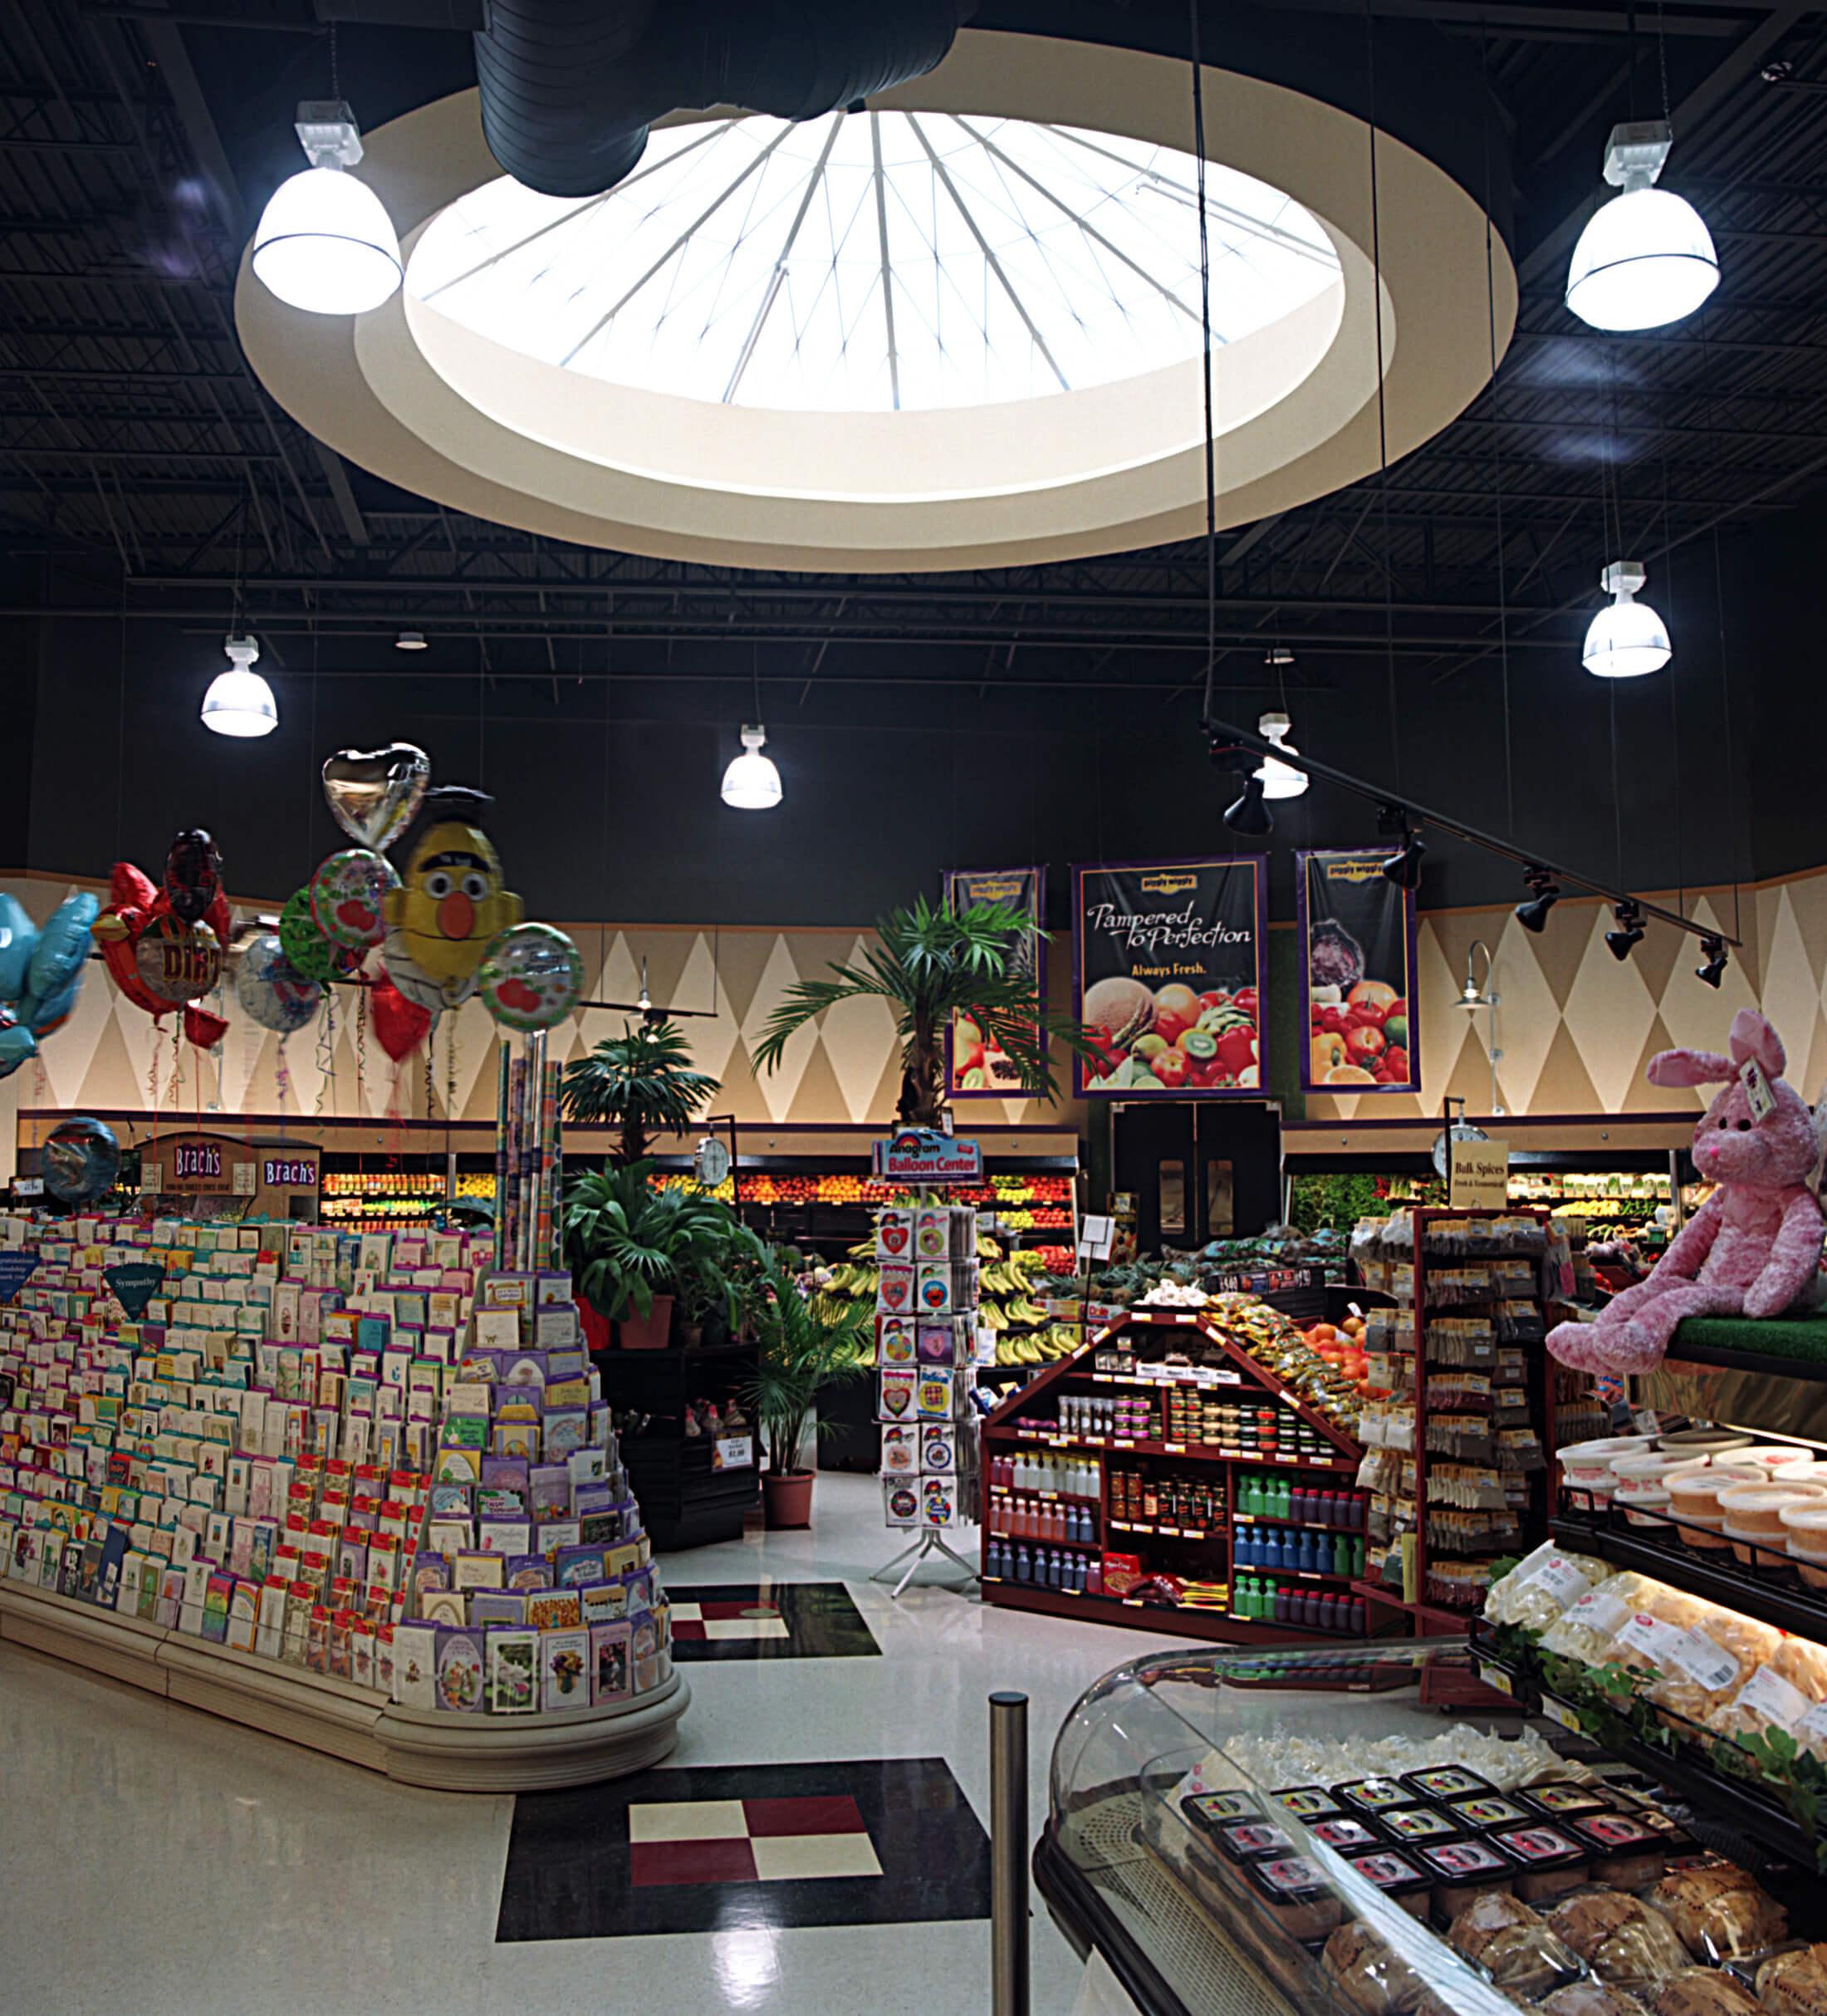 Piggly Wiggly Interior